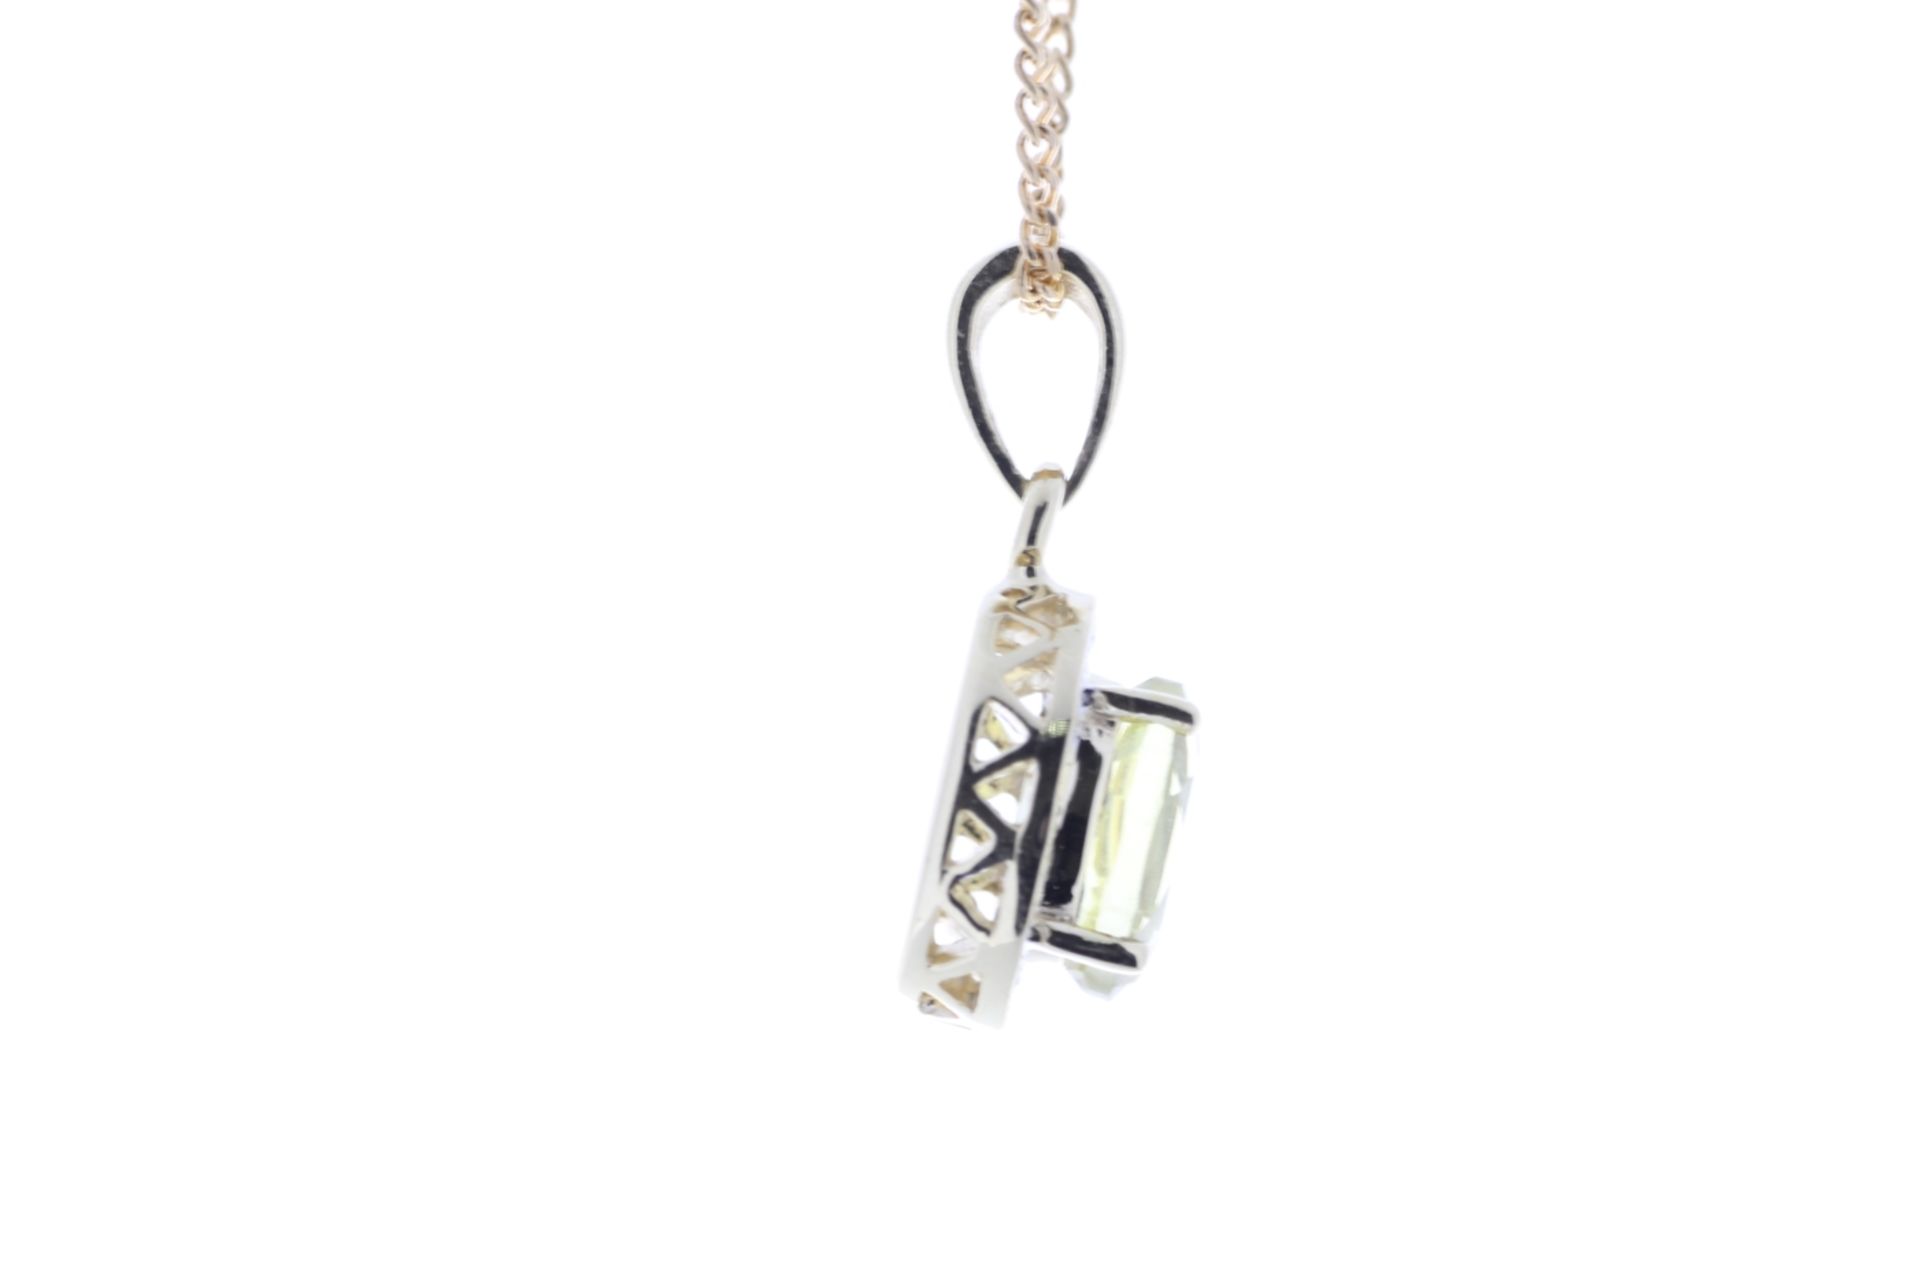 9ct Yellow Gold Diamond And Lemon Quartz Pendant 0.11 Carats - Valued by GIE £1,445.00 - This is a - Image 2 of 5